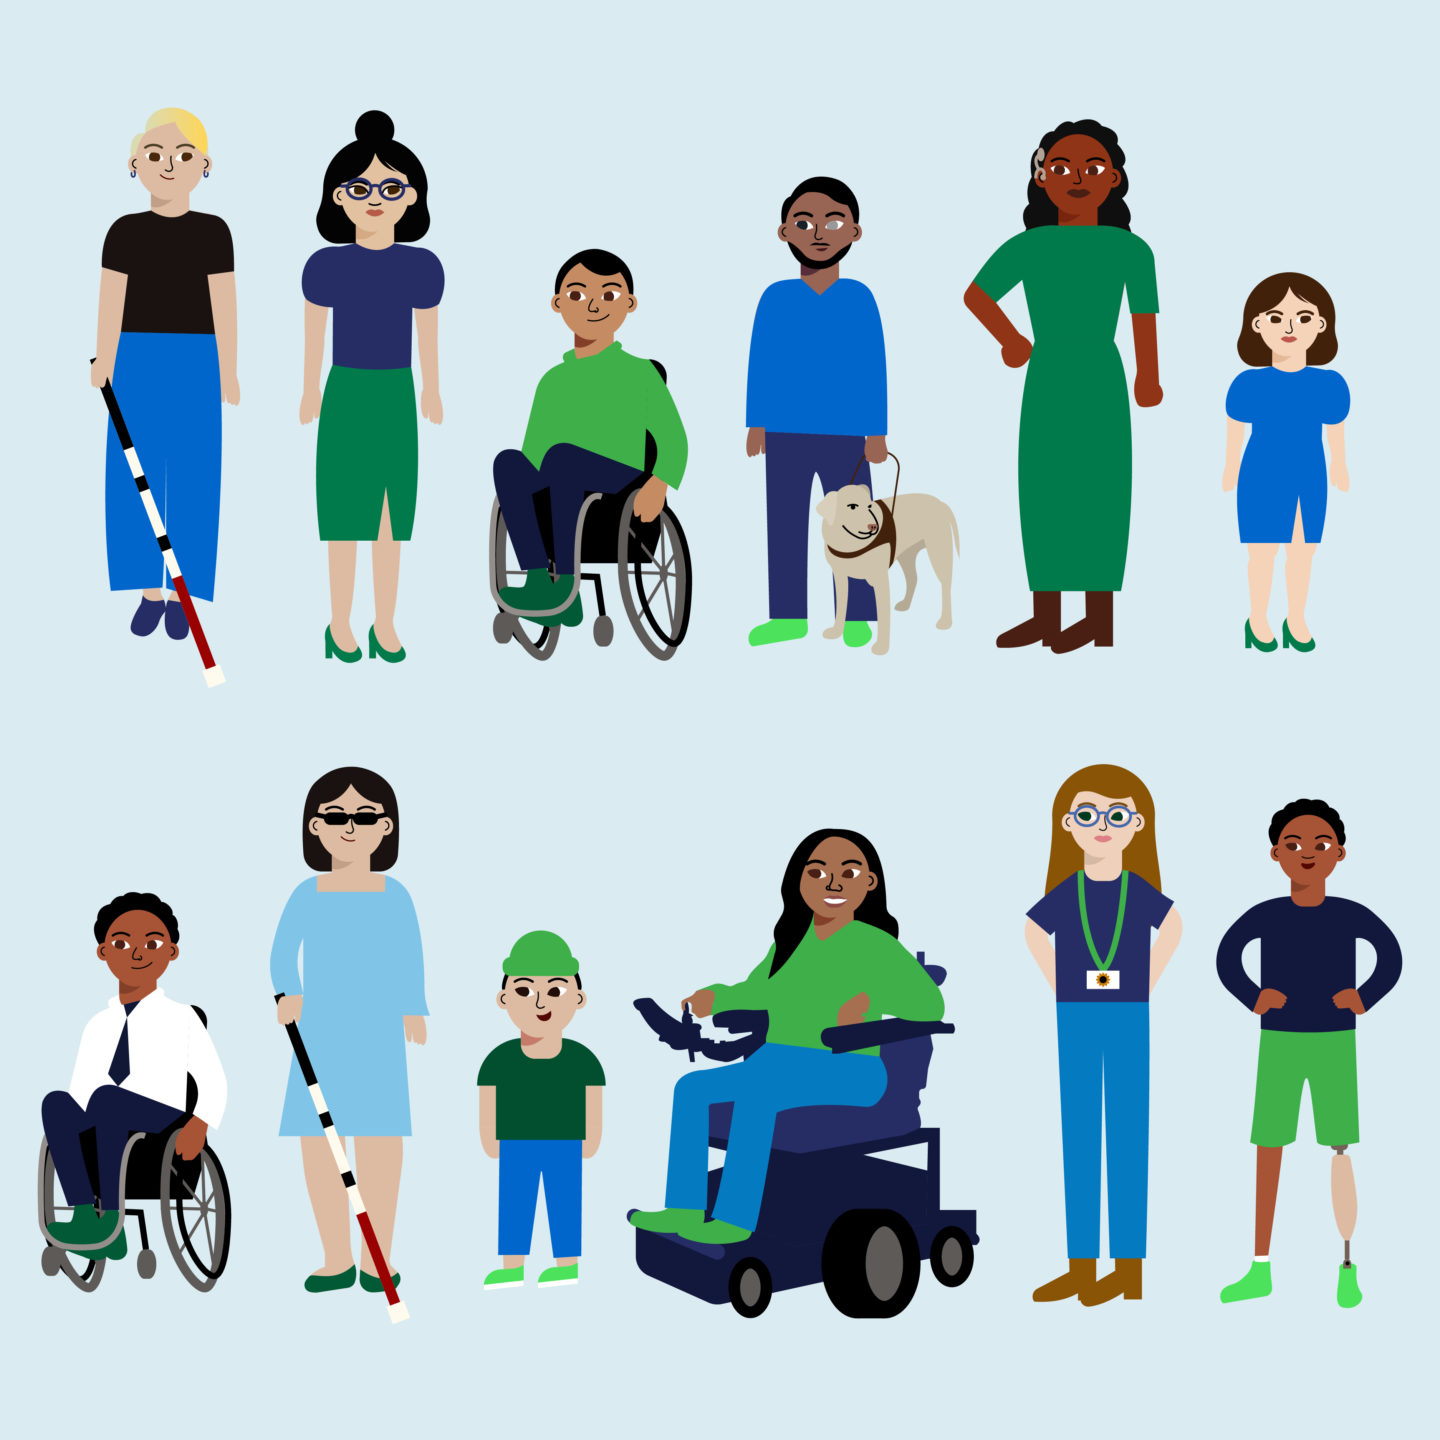 Twelve illustrated individuals with disabilities against a light blue background.